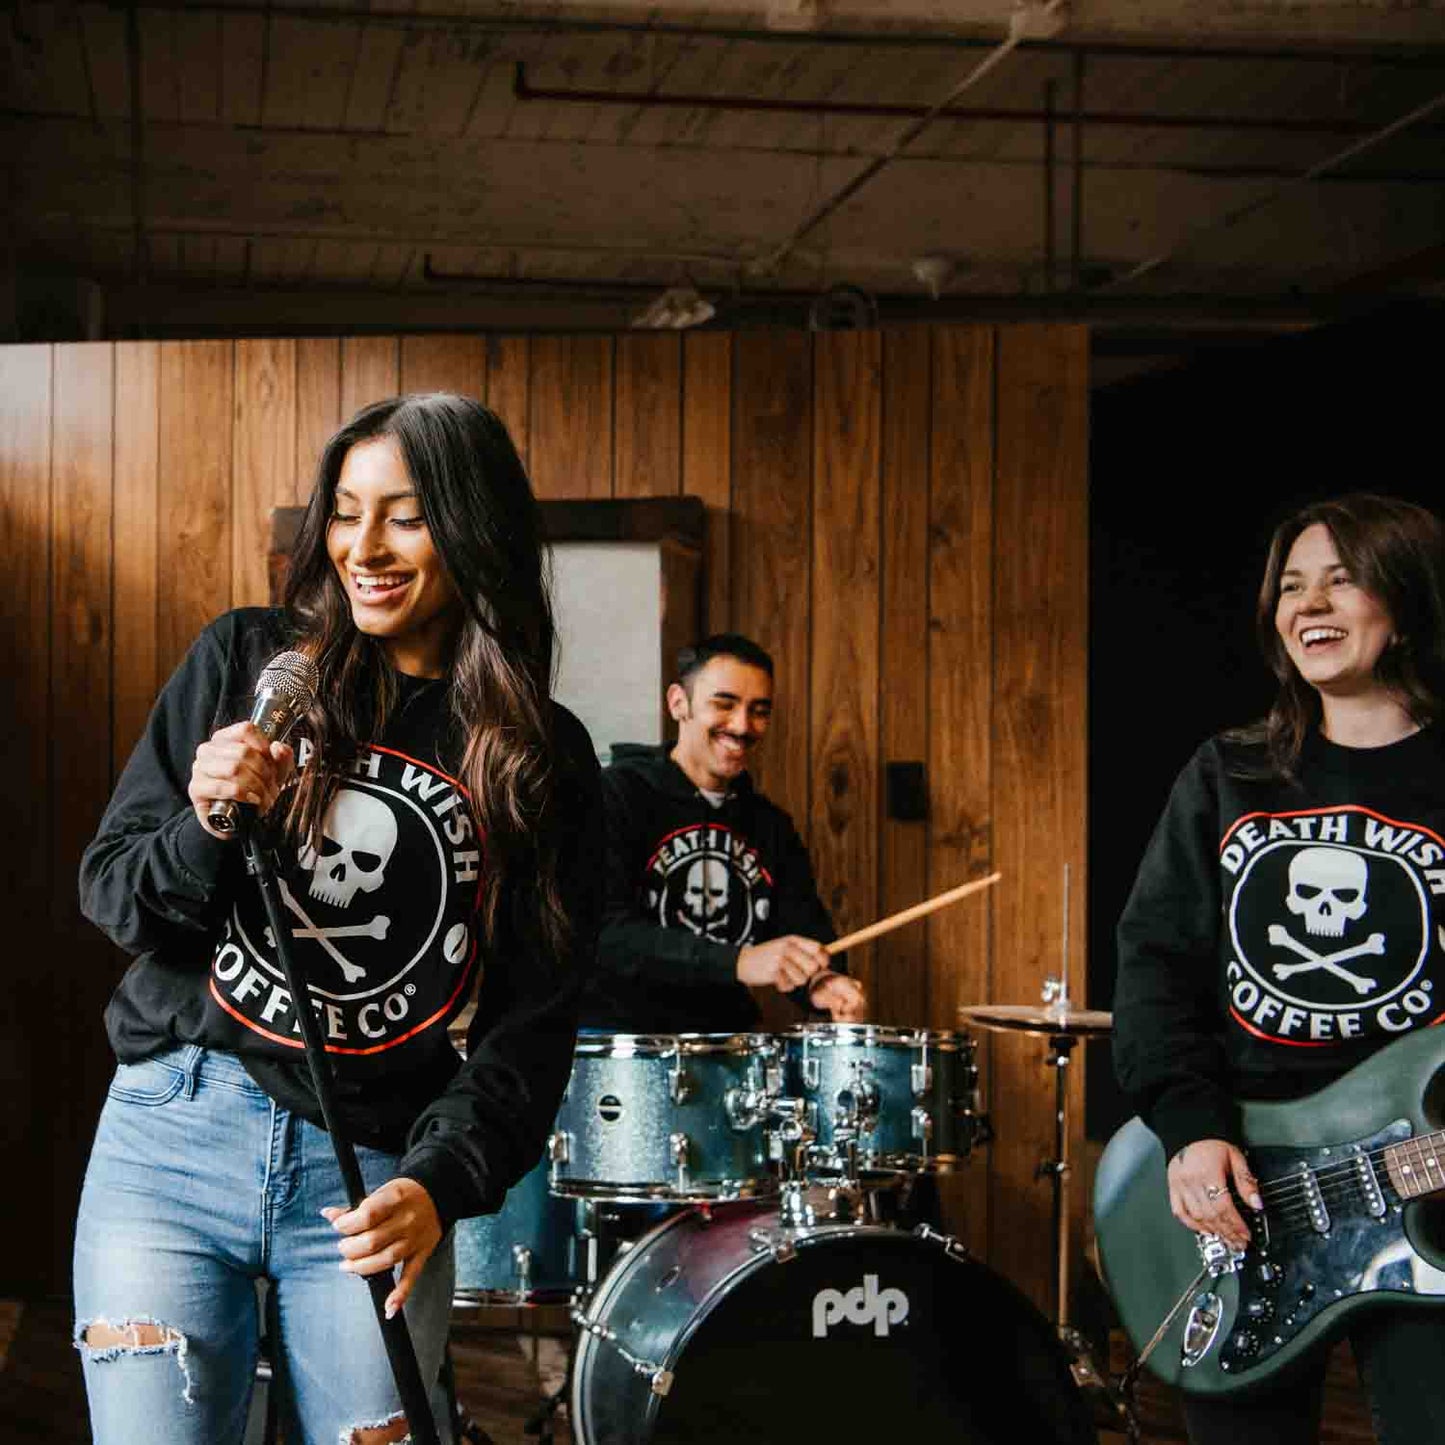 Singing during band practice in the Death Wish Coffee Classic Logo Long Sleeve Shirt.